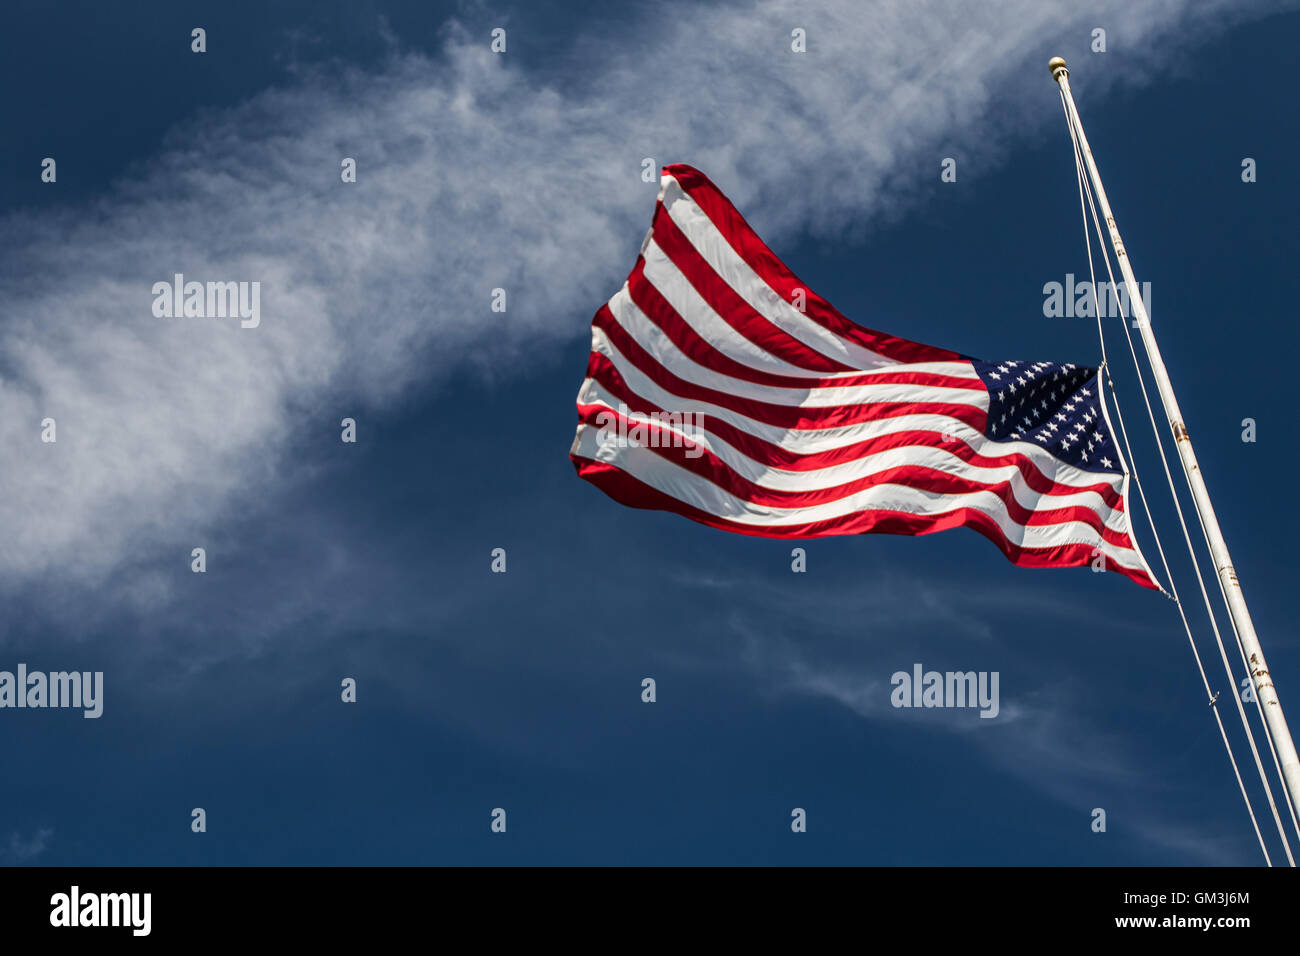 An American flag is flapping in the wind on a bright summer day. Stock Photo